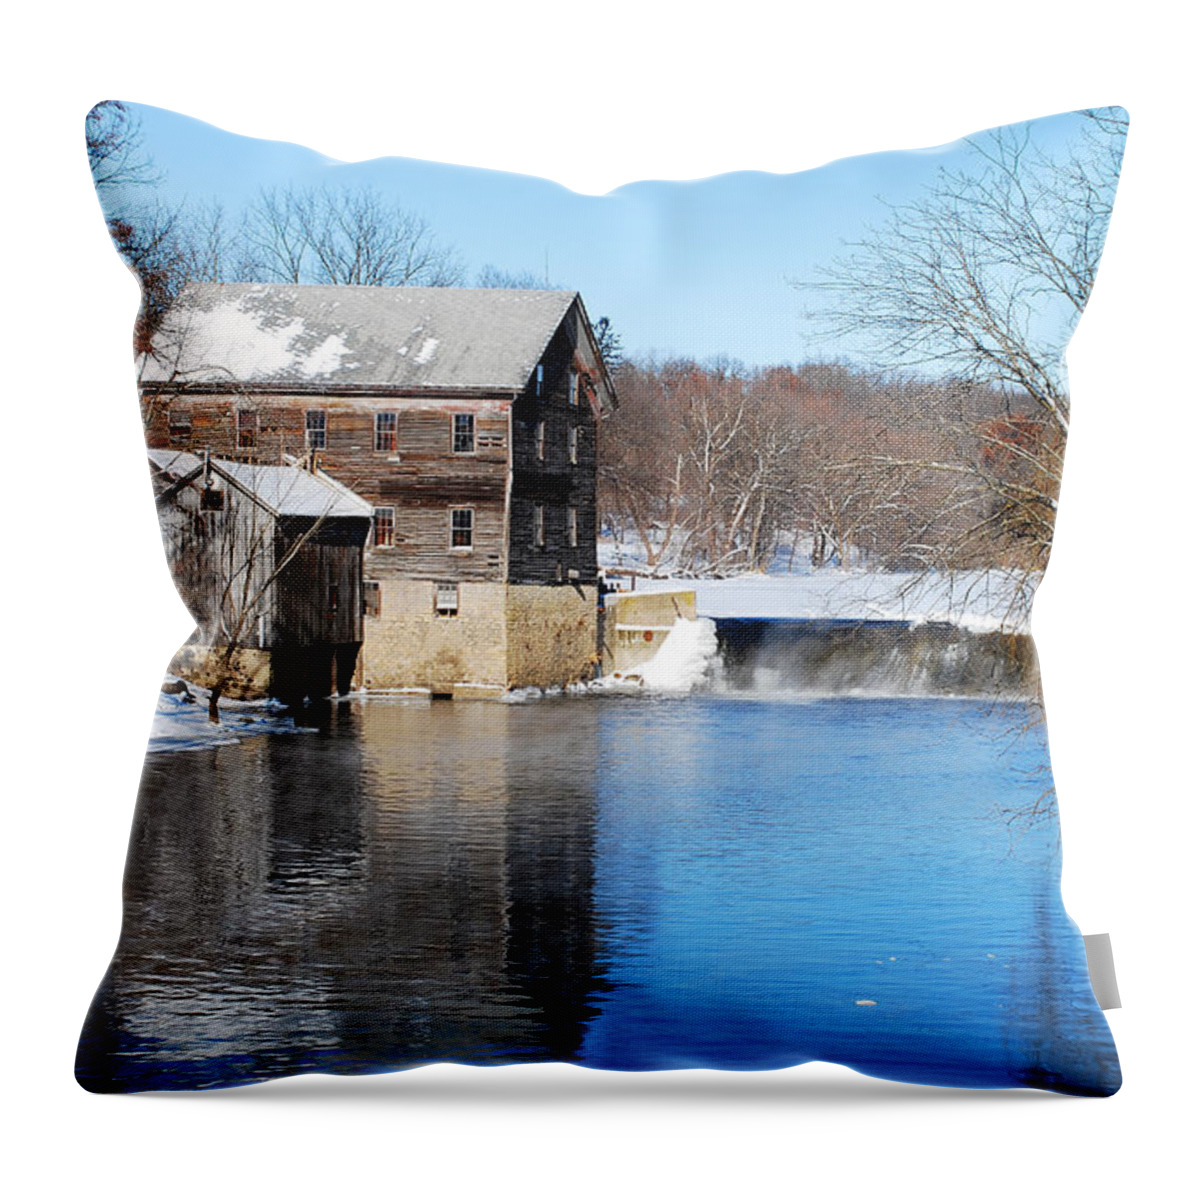 Jaeger Rye Mill Throw Pillow featuring the photograph Winter Capture Of The Old Jaeger Rye Mill by Janice Adomeit